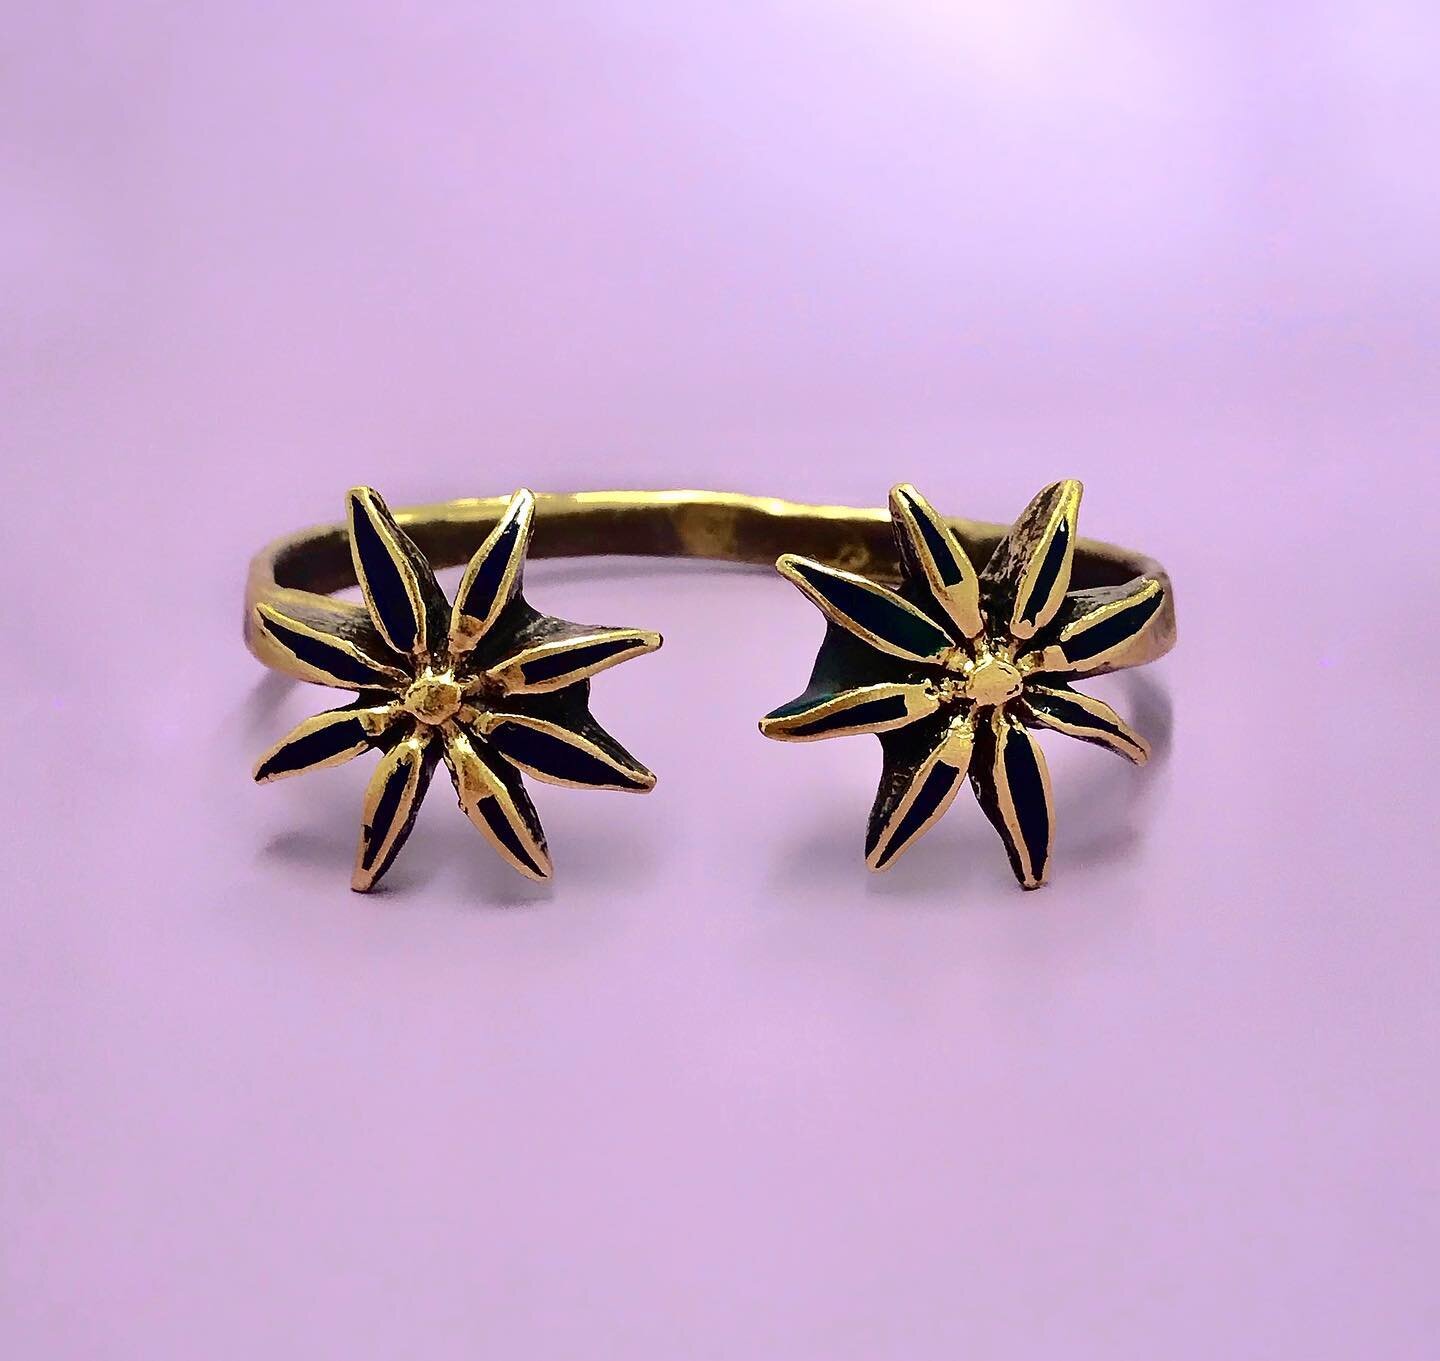 Happy Friday! We have a discount code for you, enjoy 10% off this weekend on the Mor London website with; WEEKEND10

Discount code valid until Sunday at 11.59pm🤝✨

This is our Black Daisy Cuff🖤

#jewellery #happyshopping #bracelet #cuffs #giftideas